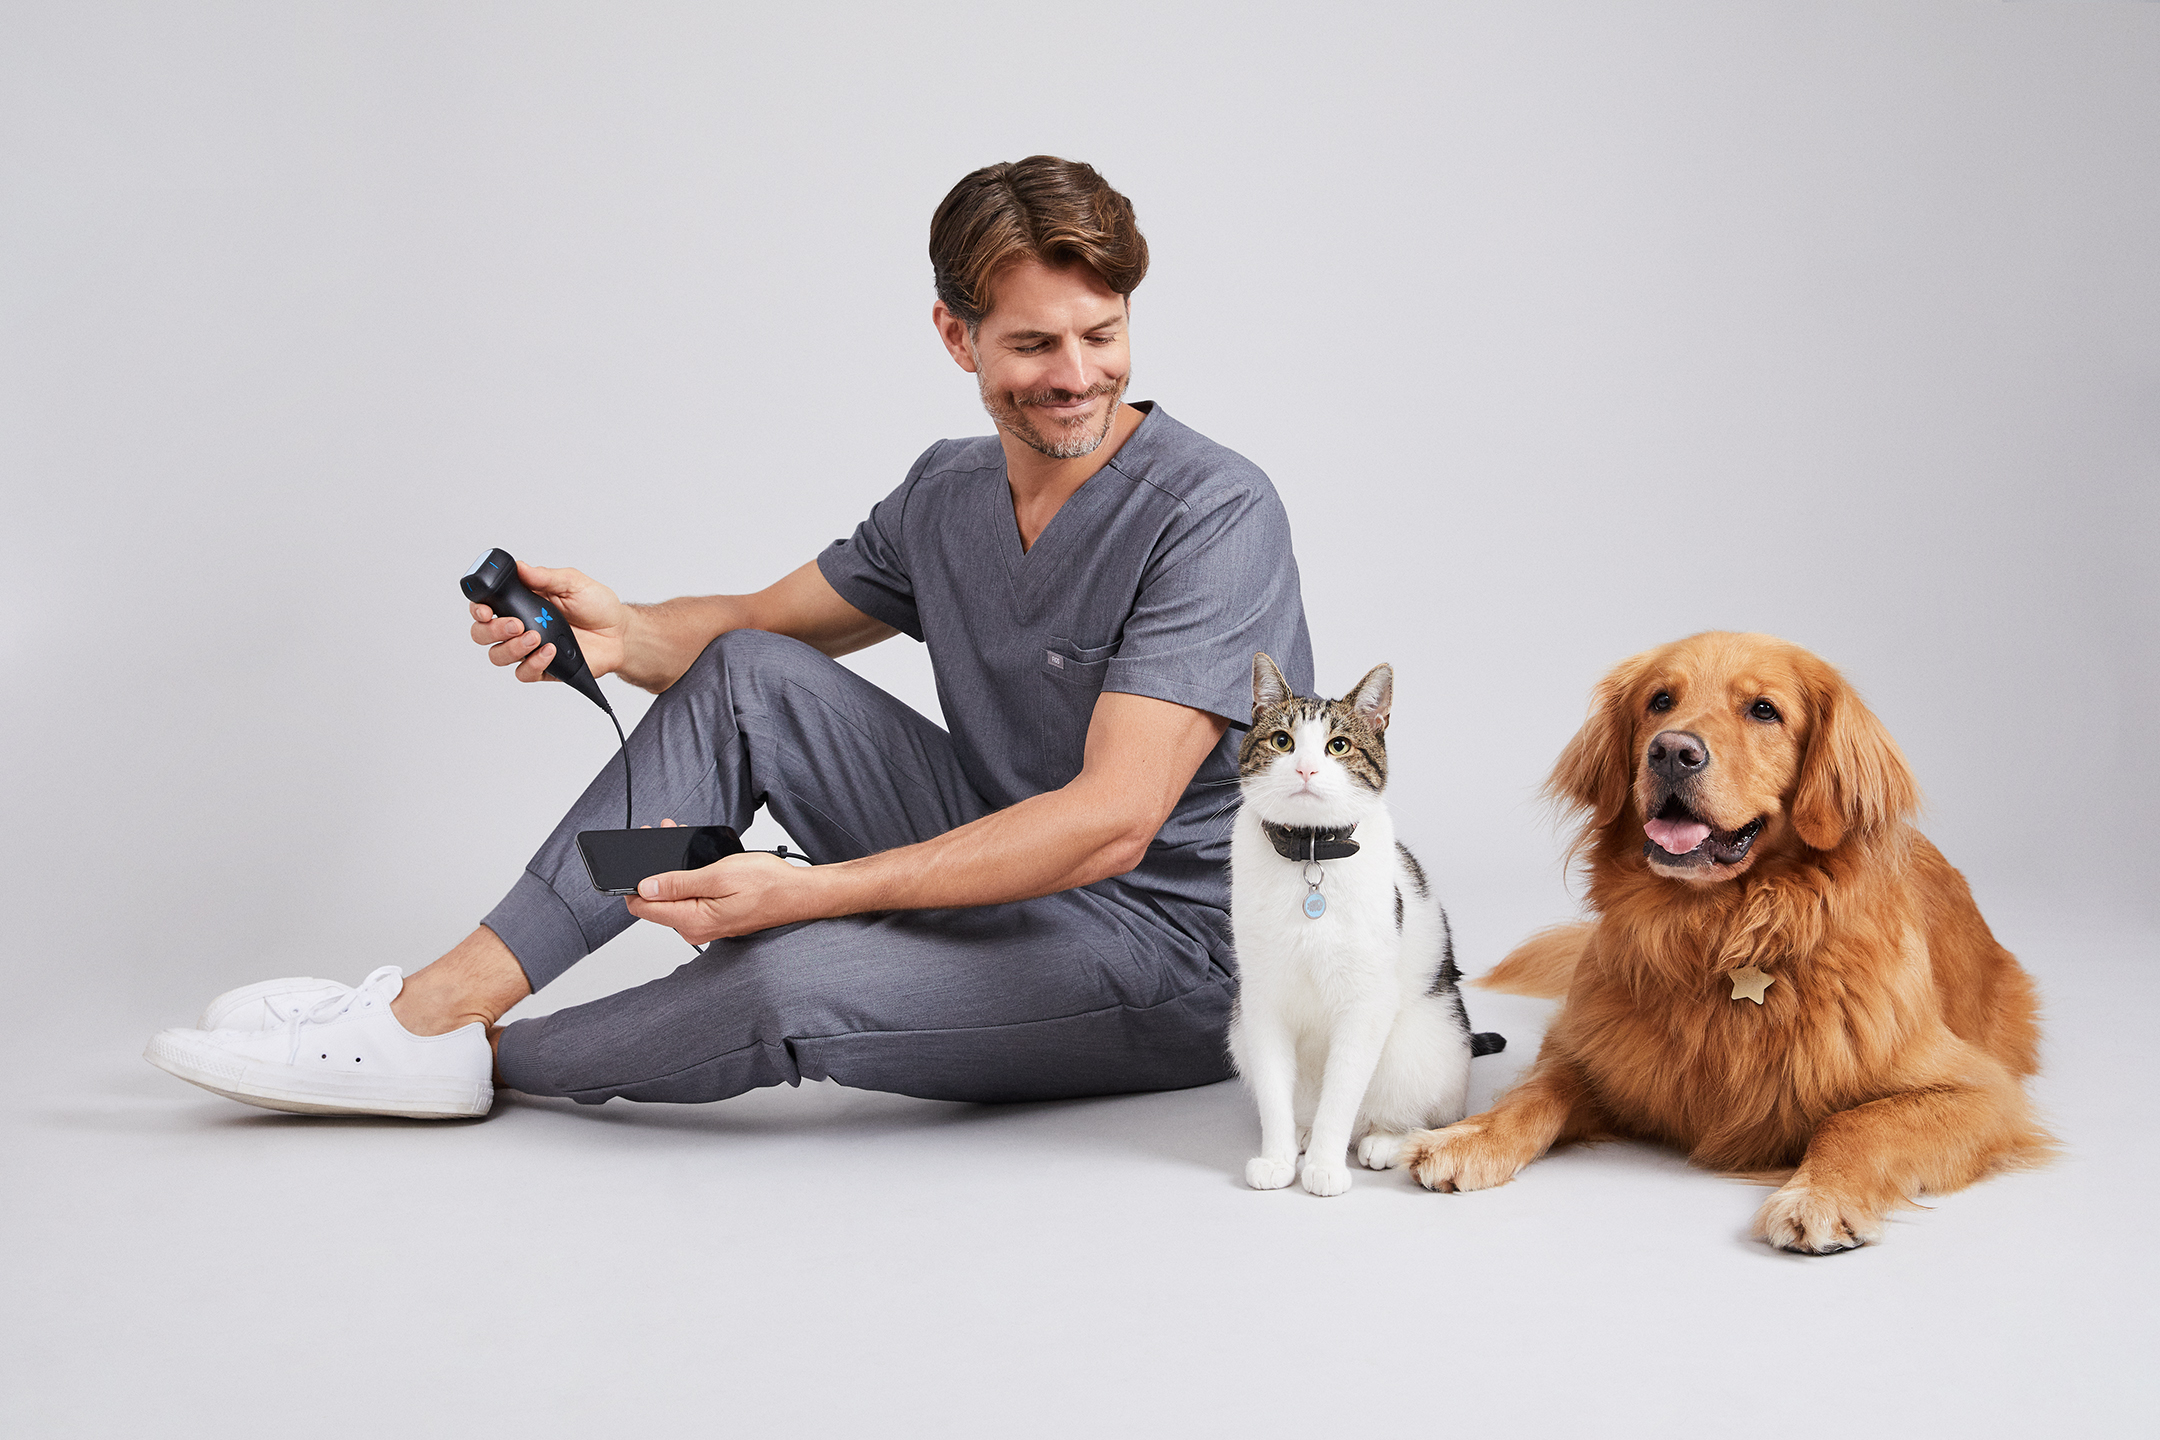 Portable Butterfly iQ Vet Device is Launched | Pet Age